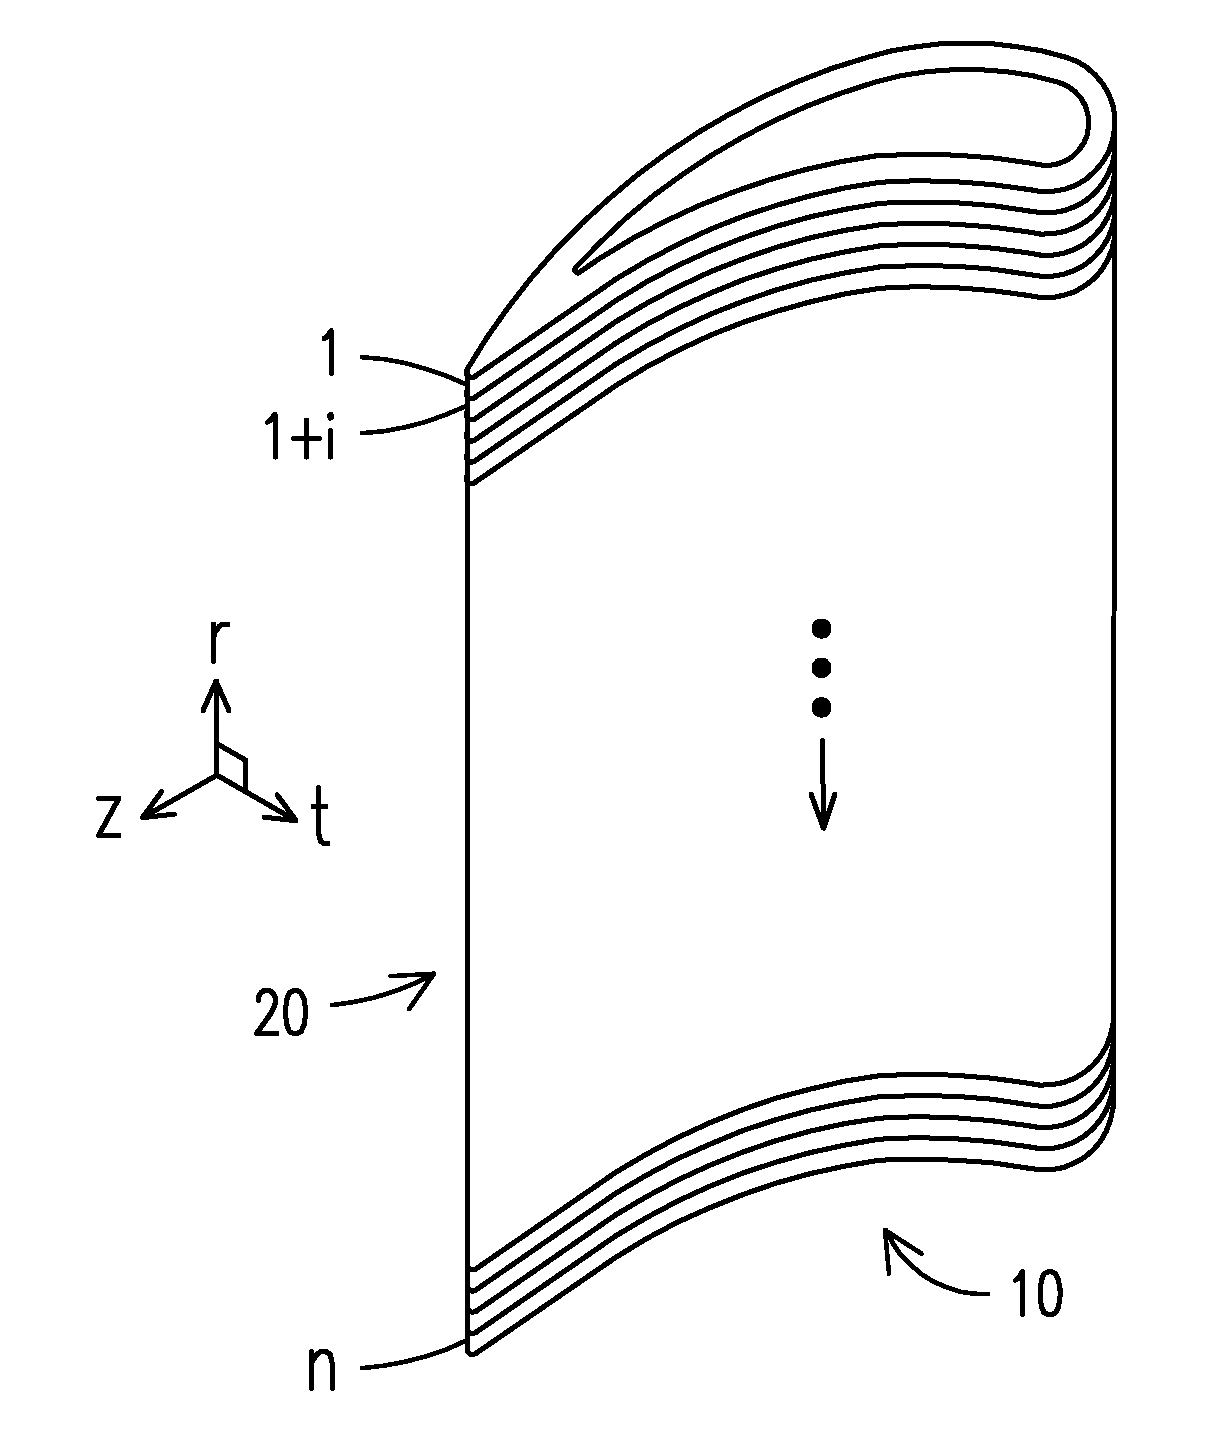 Process for Manufacturing a Component